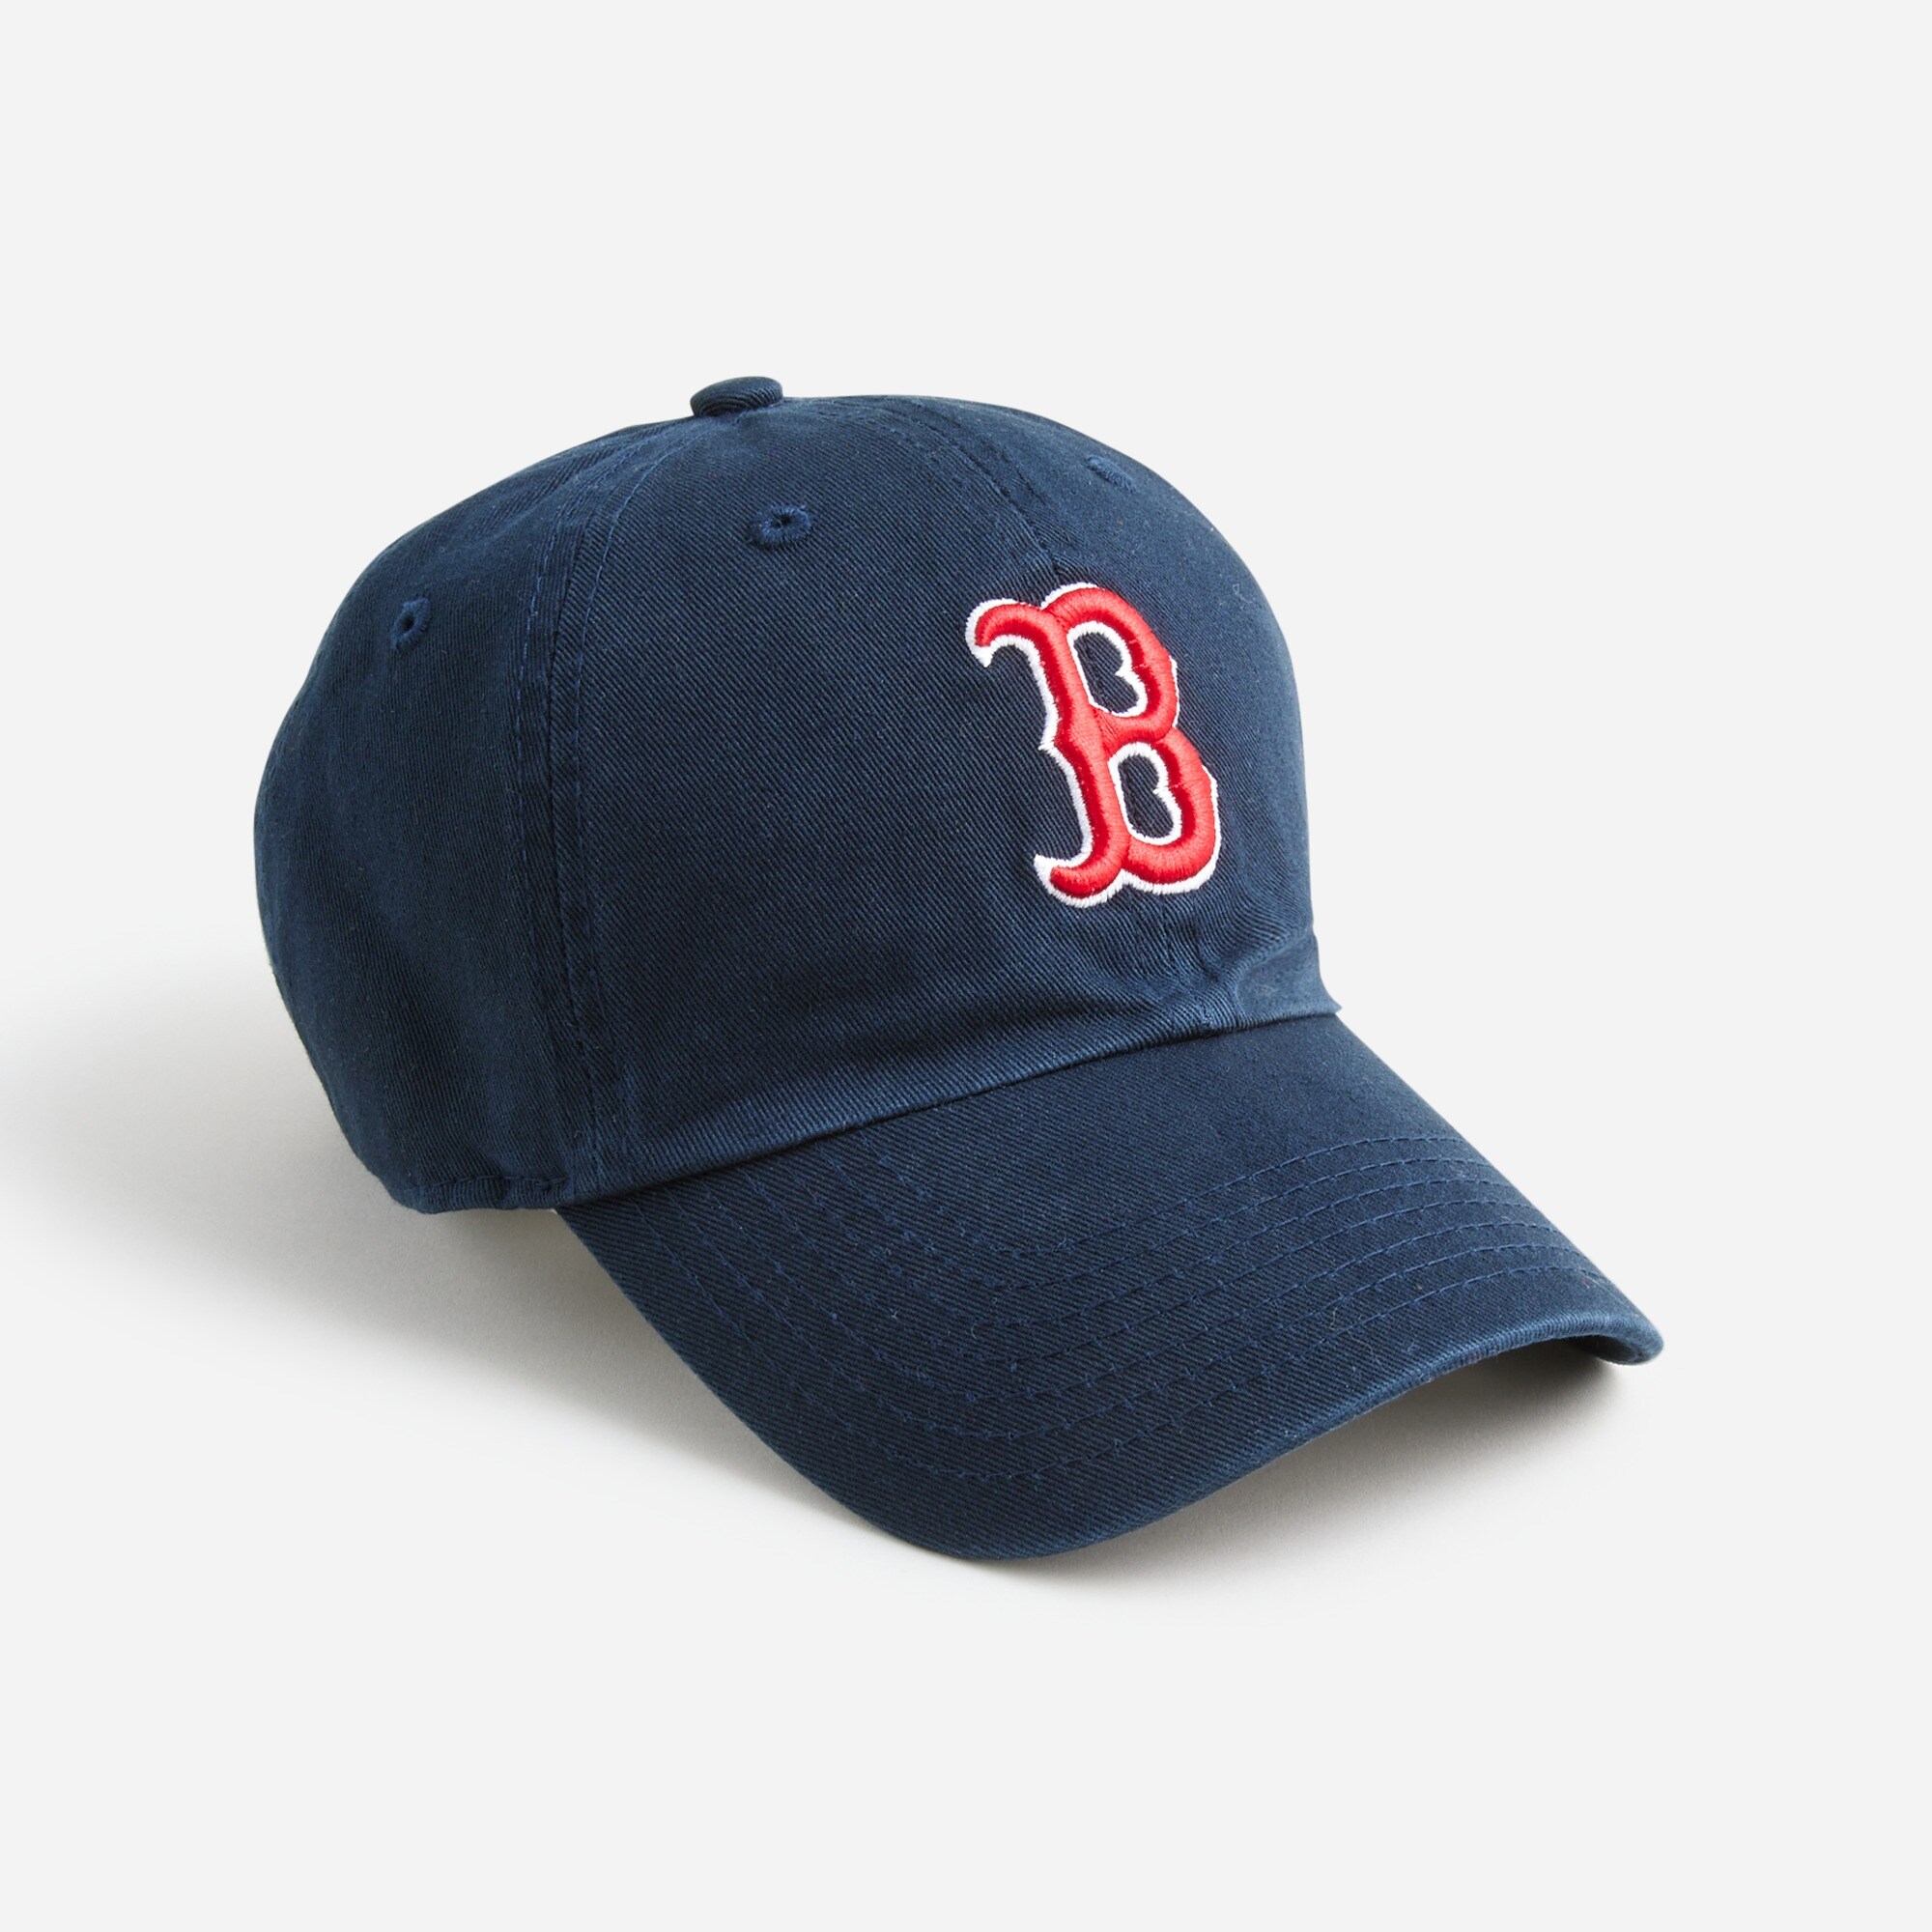 boys '47 Brand kids' cleanup cap in garment-dyed twill